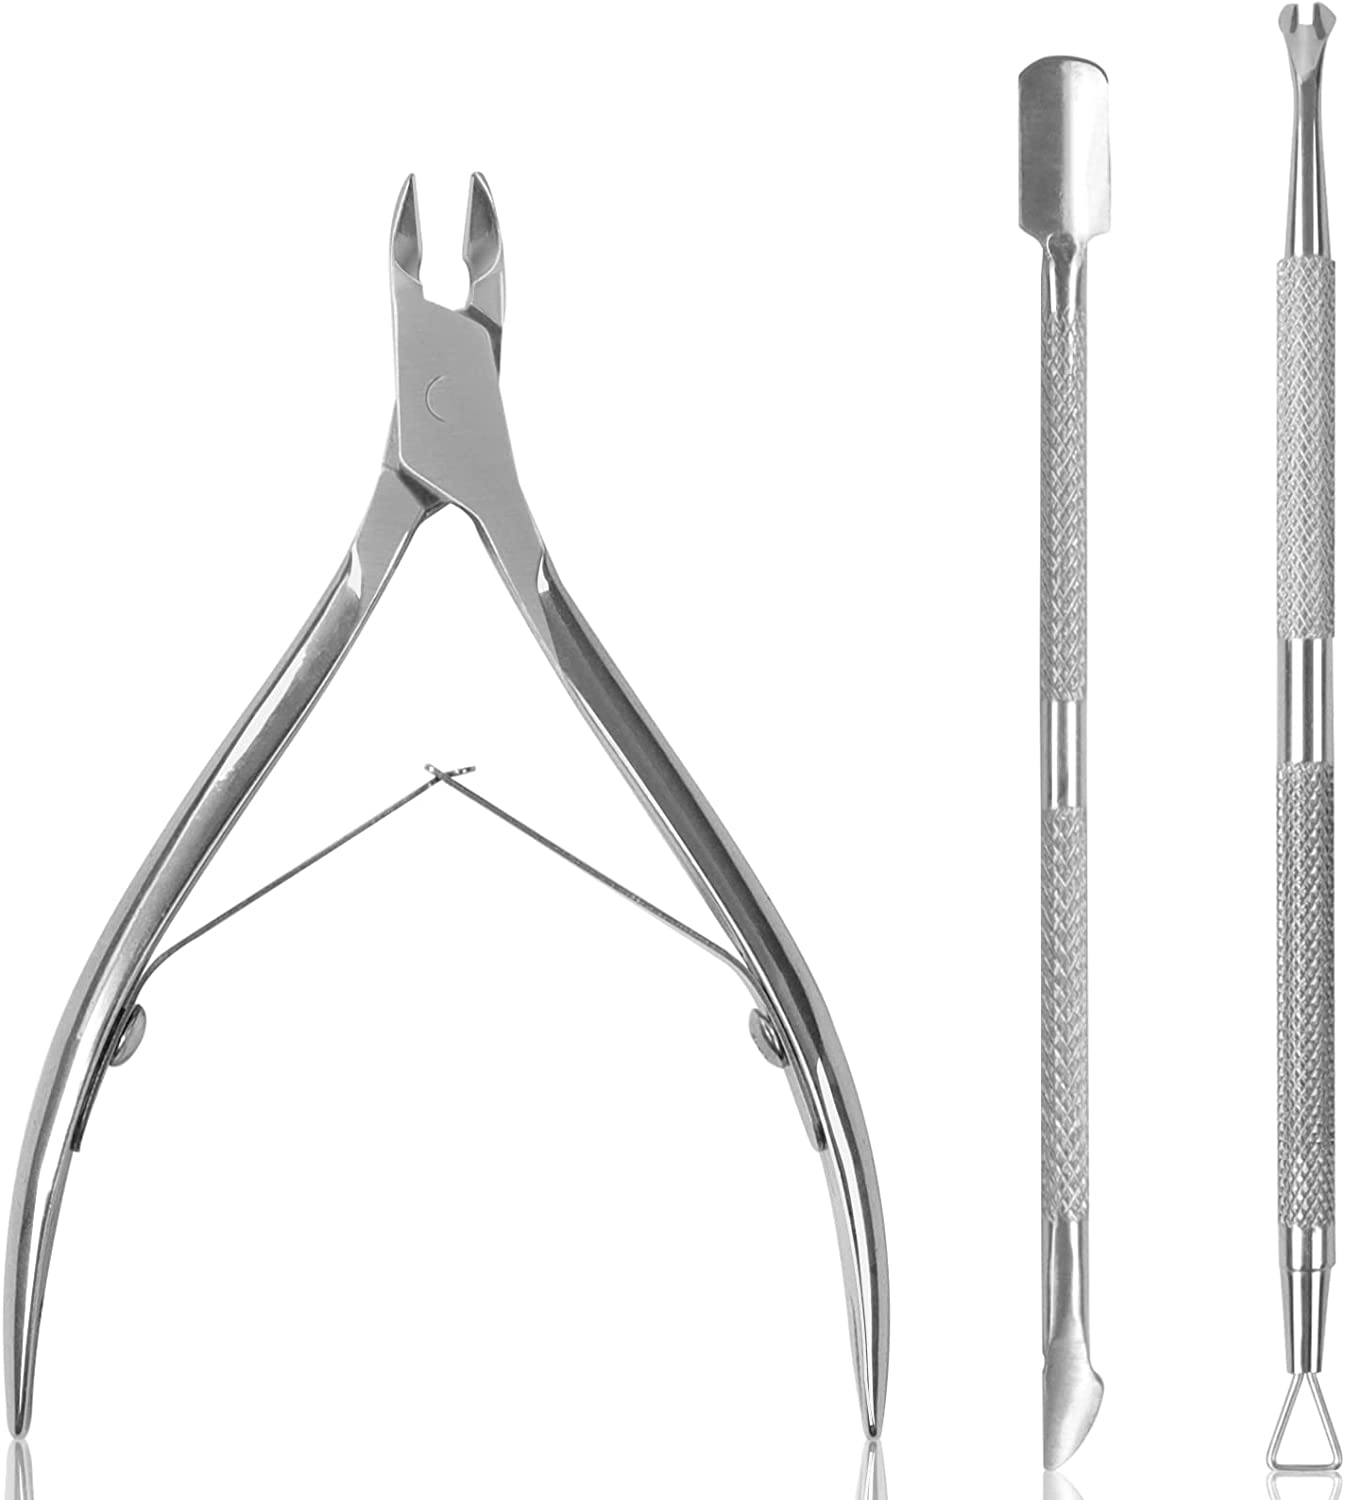 Silver Stainless Steel Professional Cuticle Nipper and Pusher Nail Care Tools for Salon and Level Mani-Pedi at Home